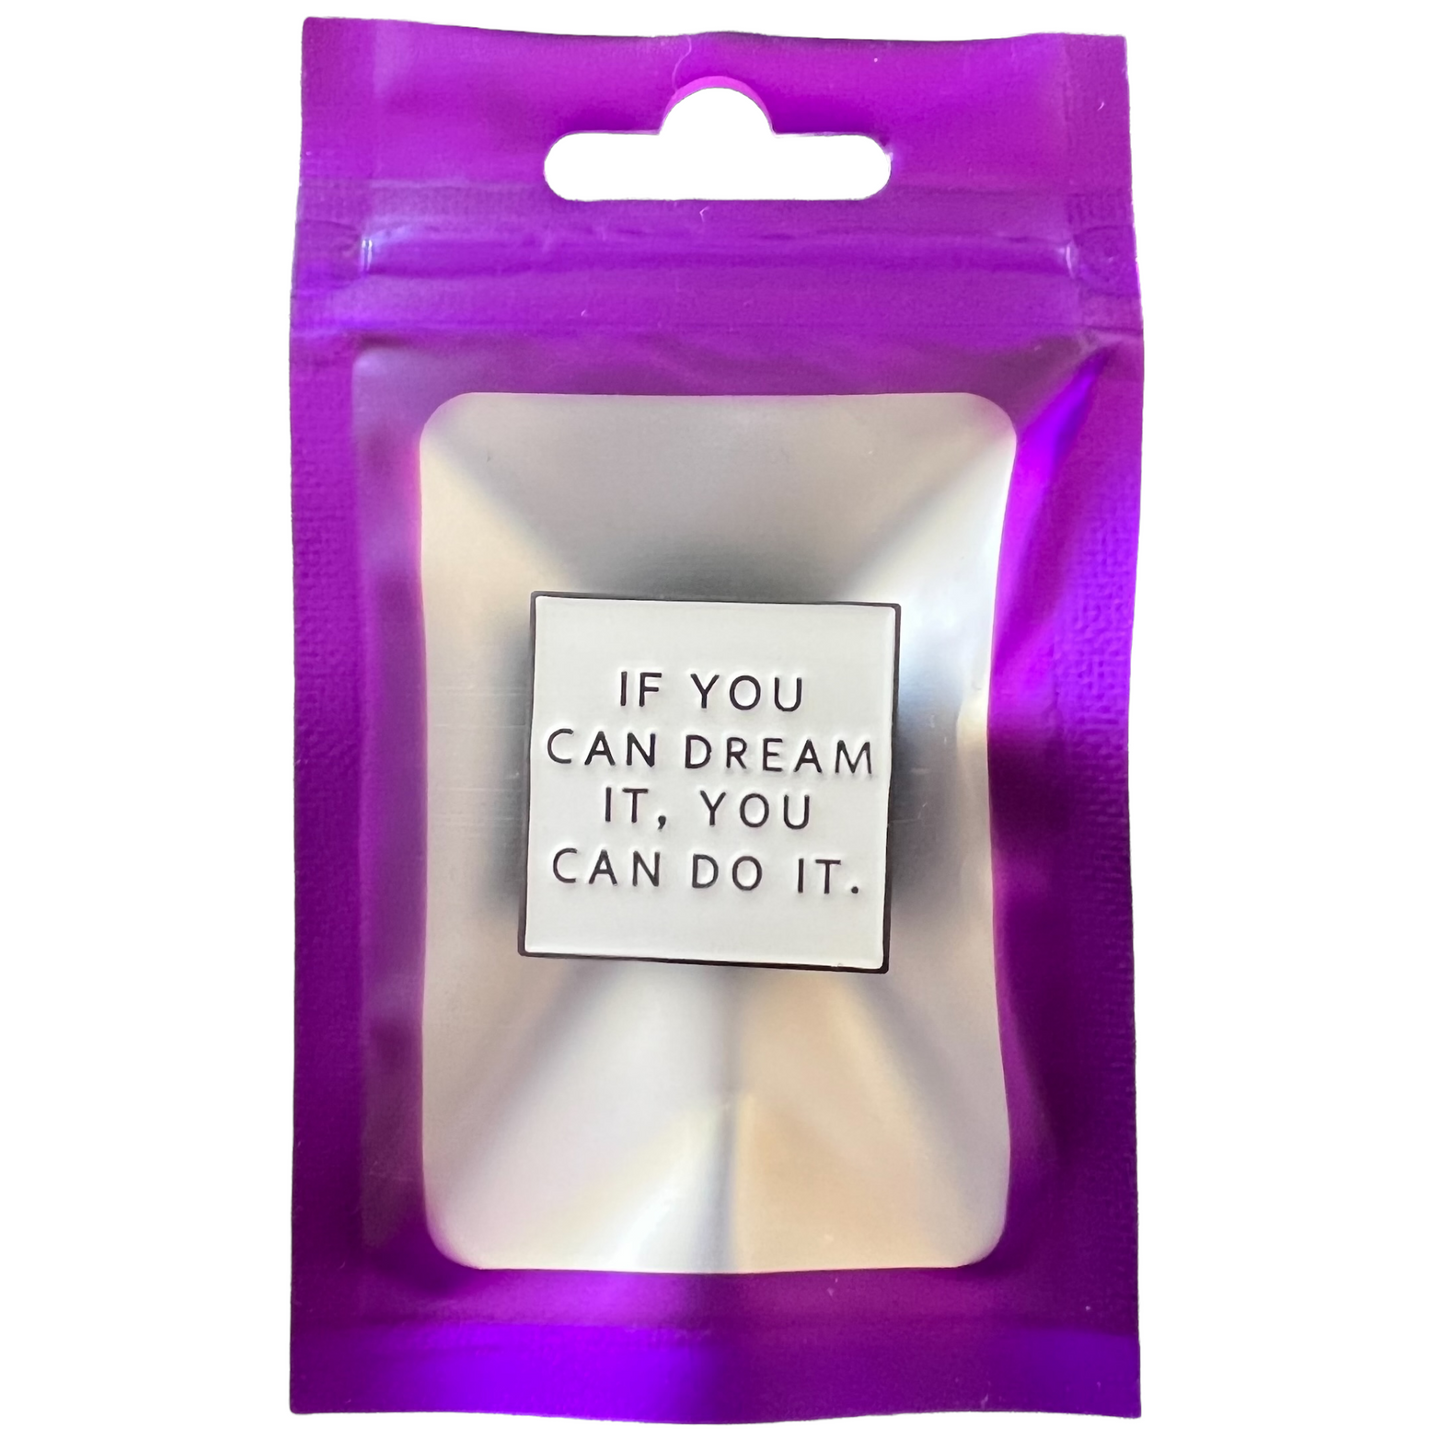 Pin — 'If You Can Dream It, You Can Do It'  SPIRIT SPARKPLUGS   